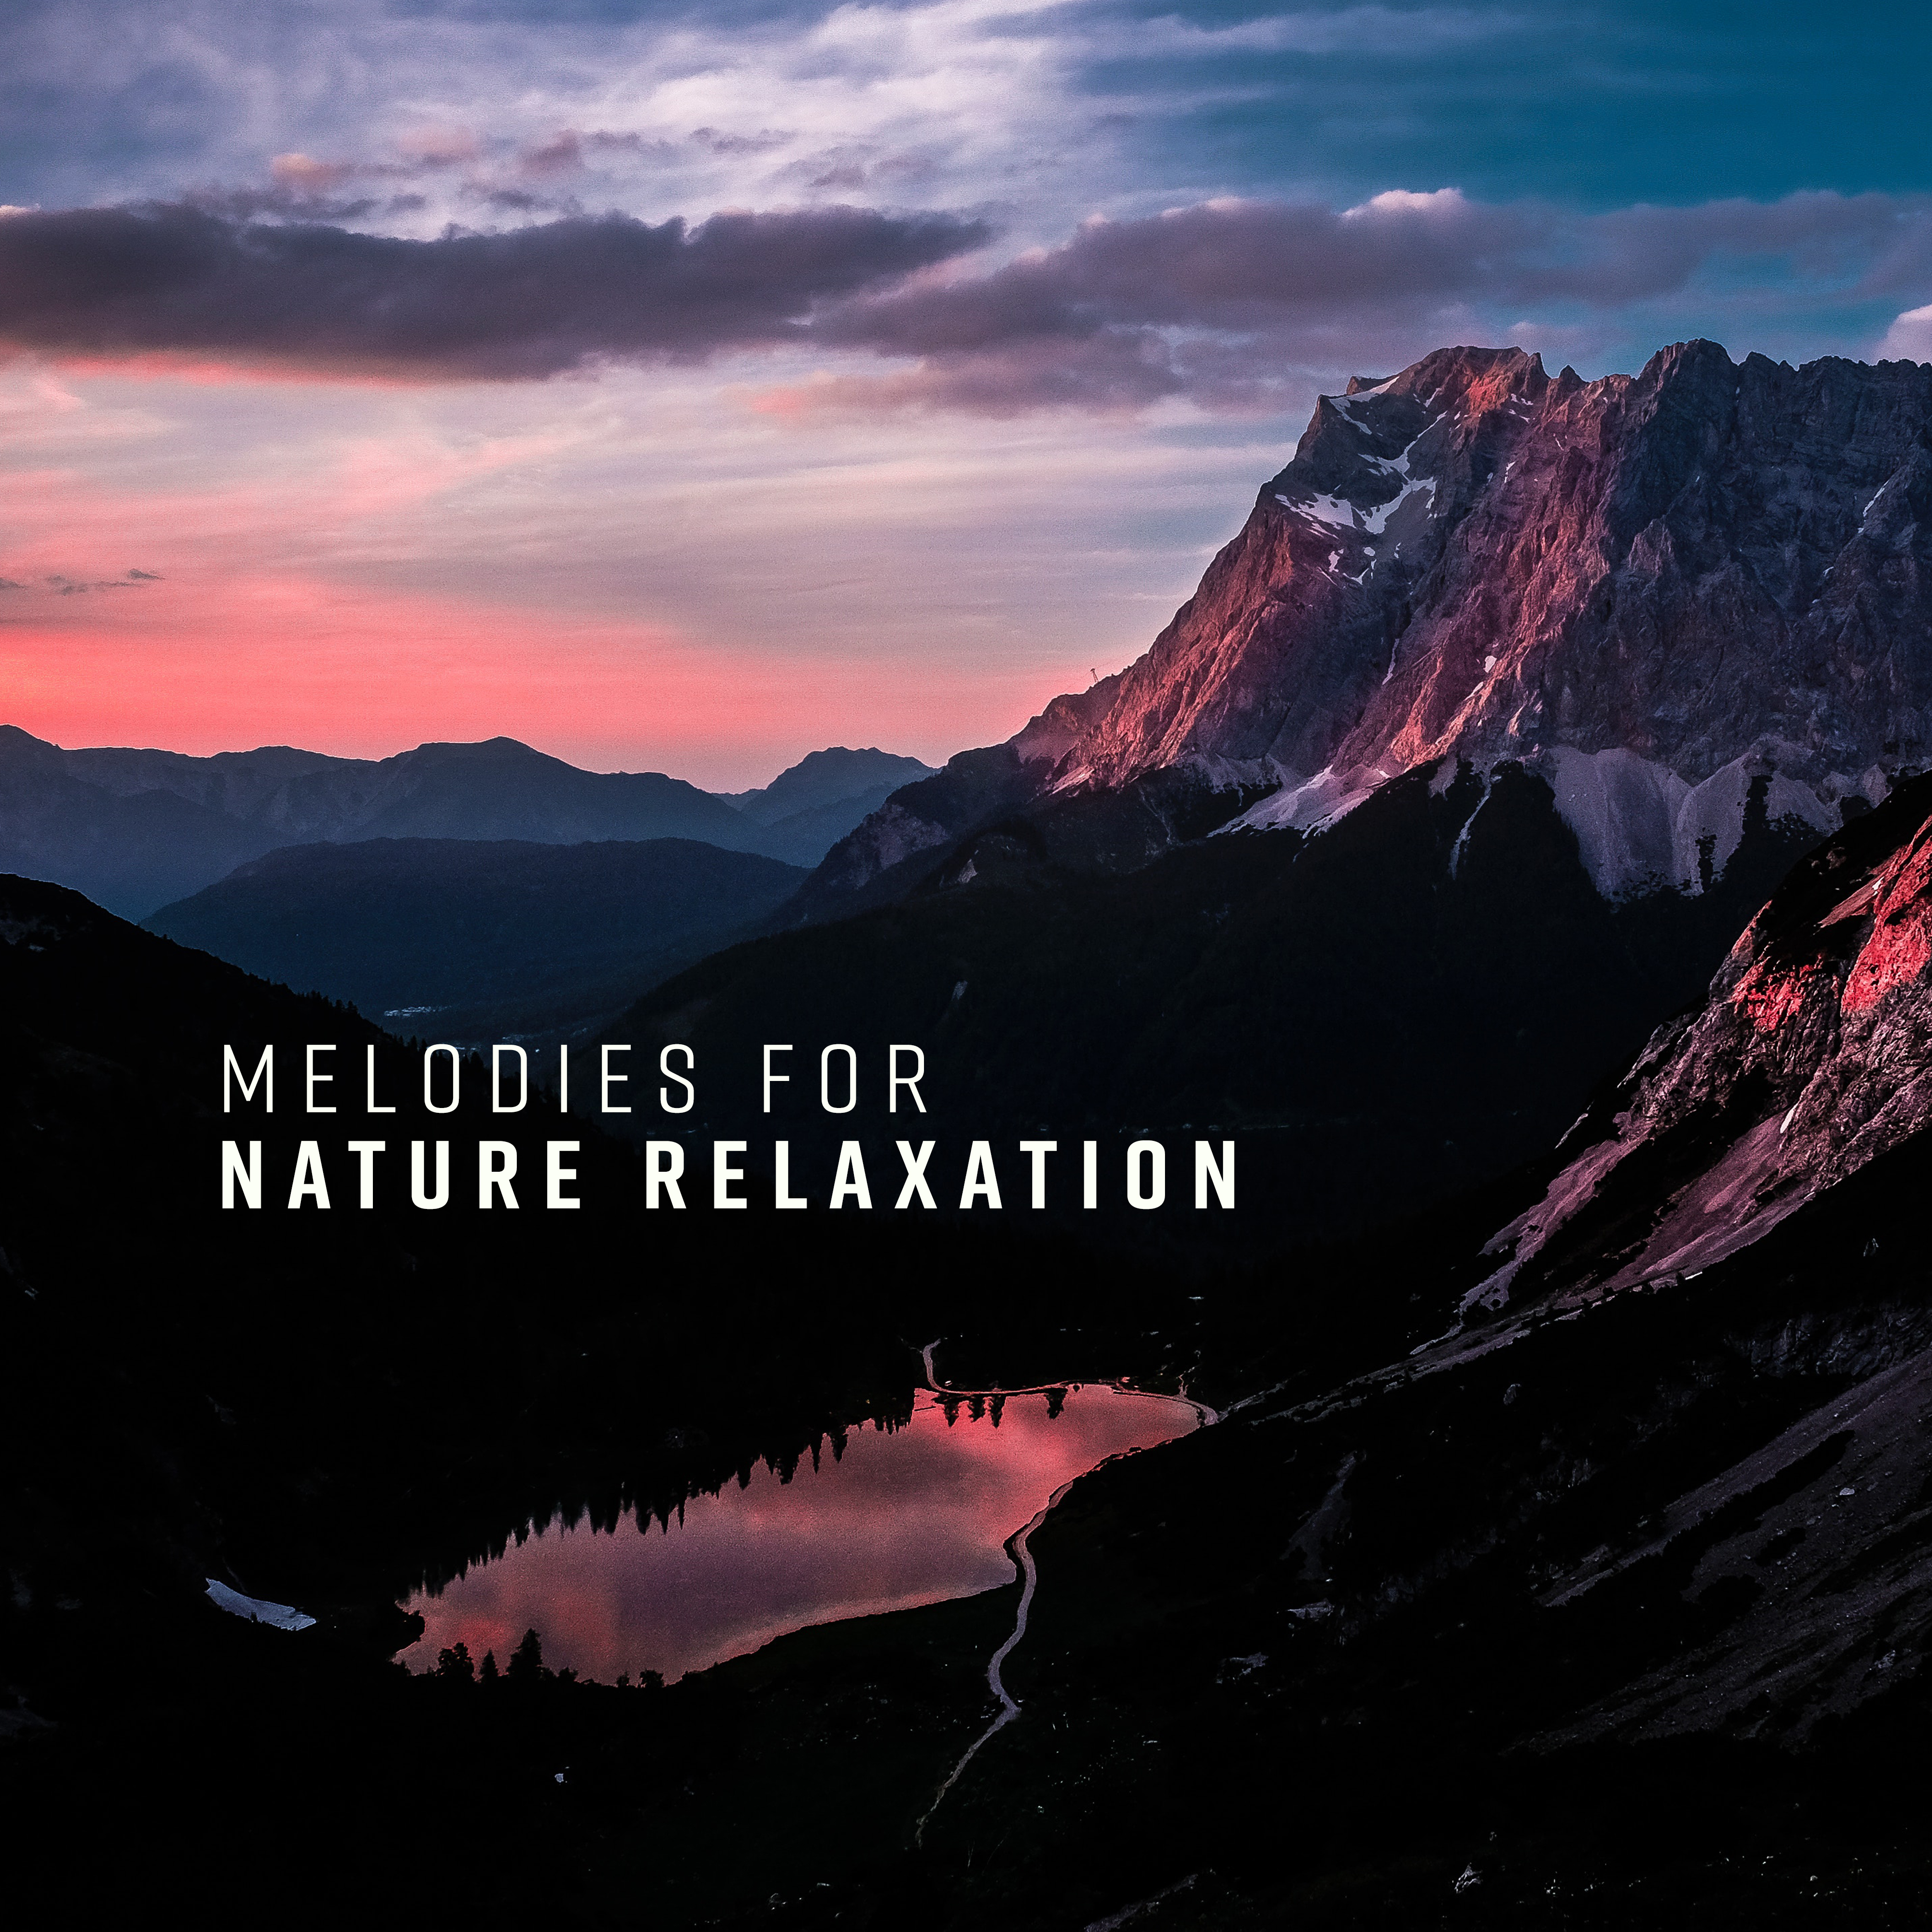 Melodies for Nature Relaxation